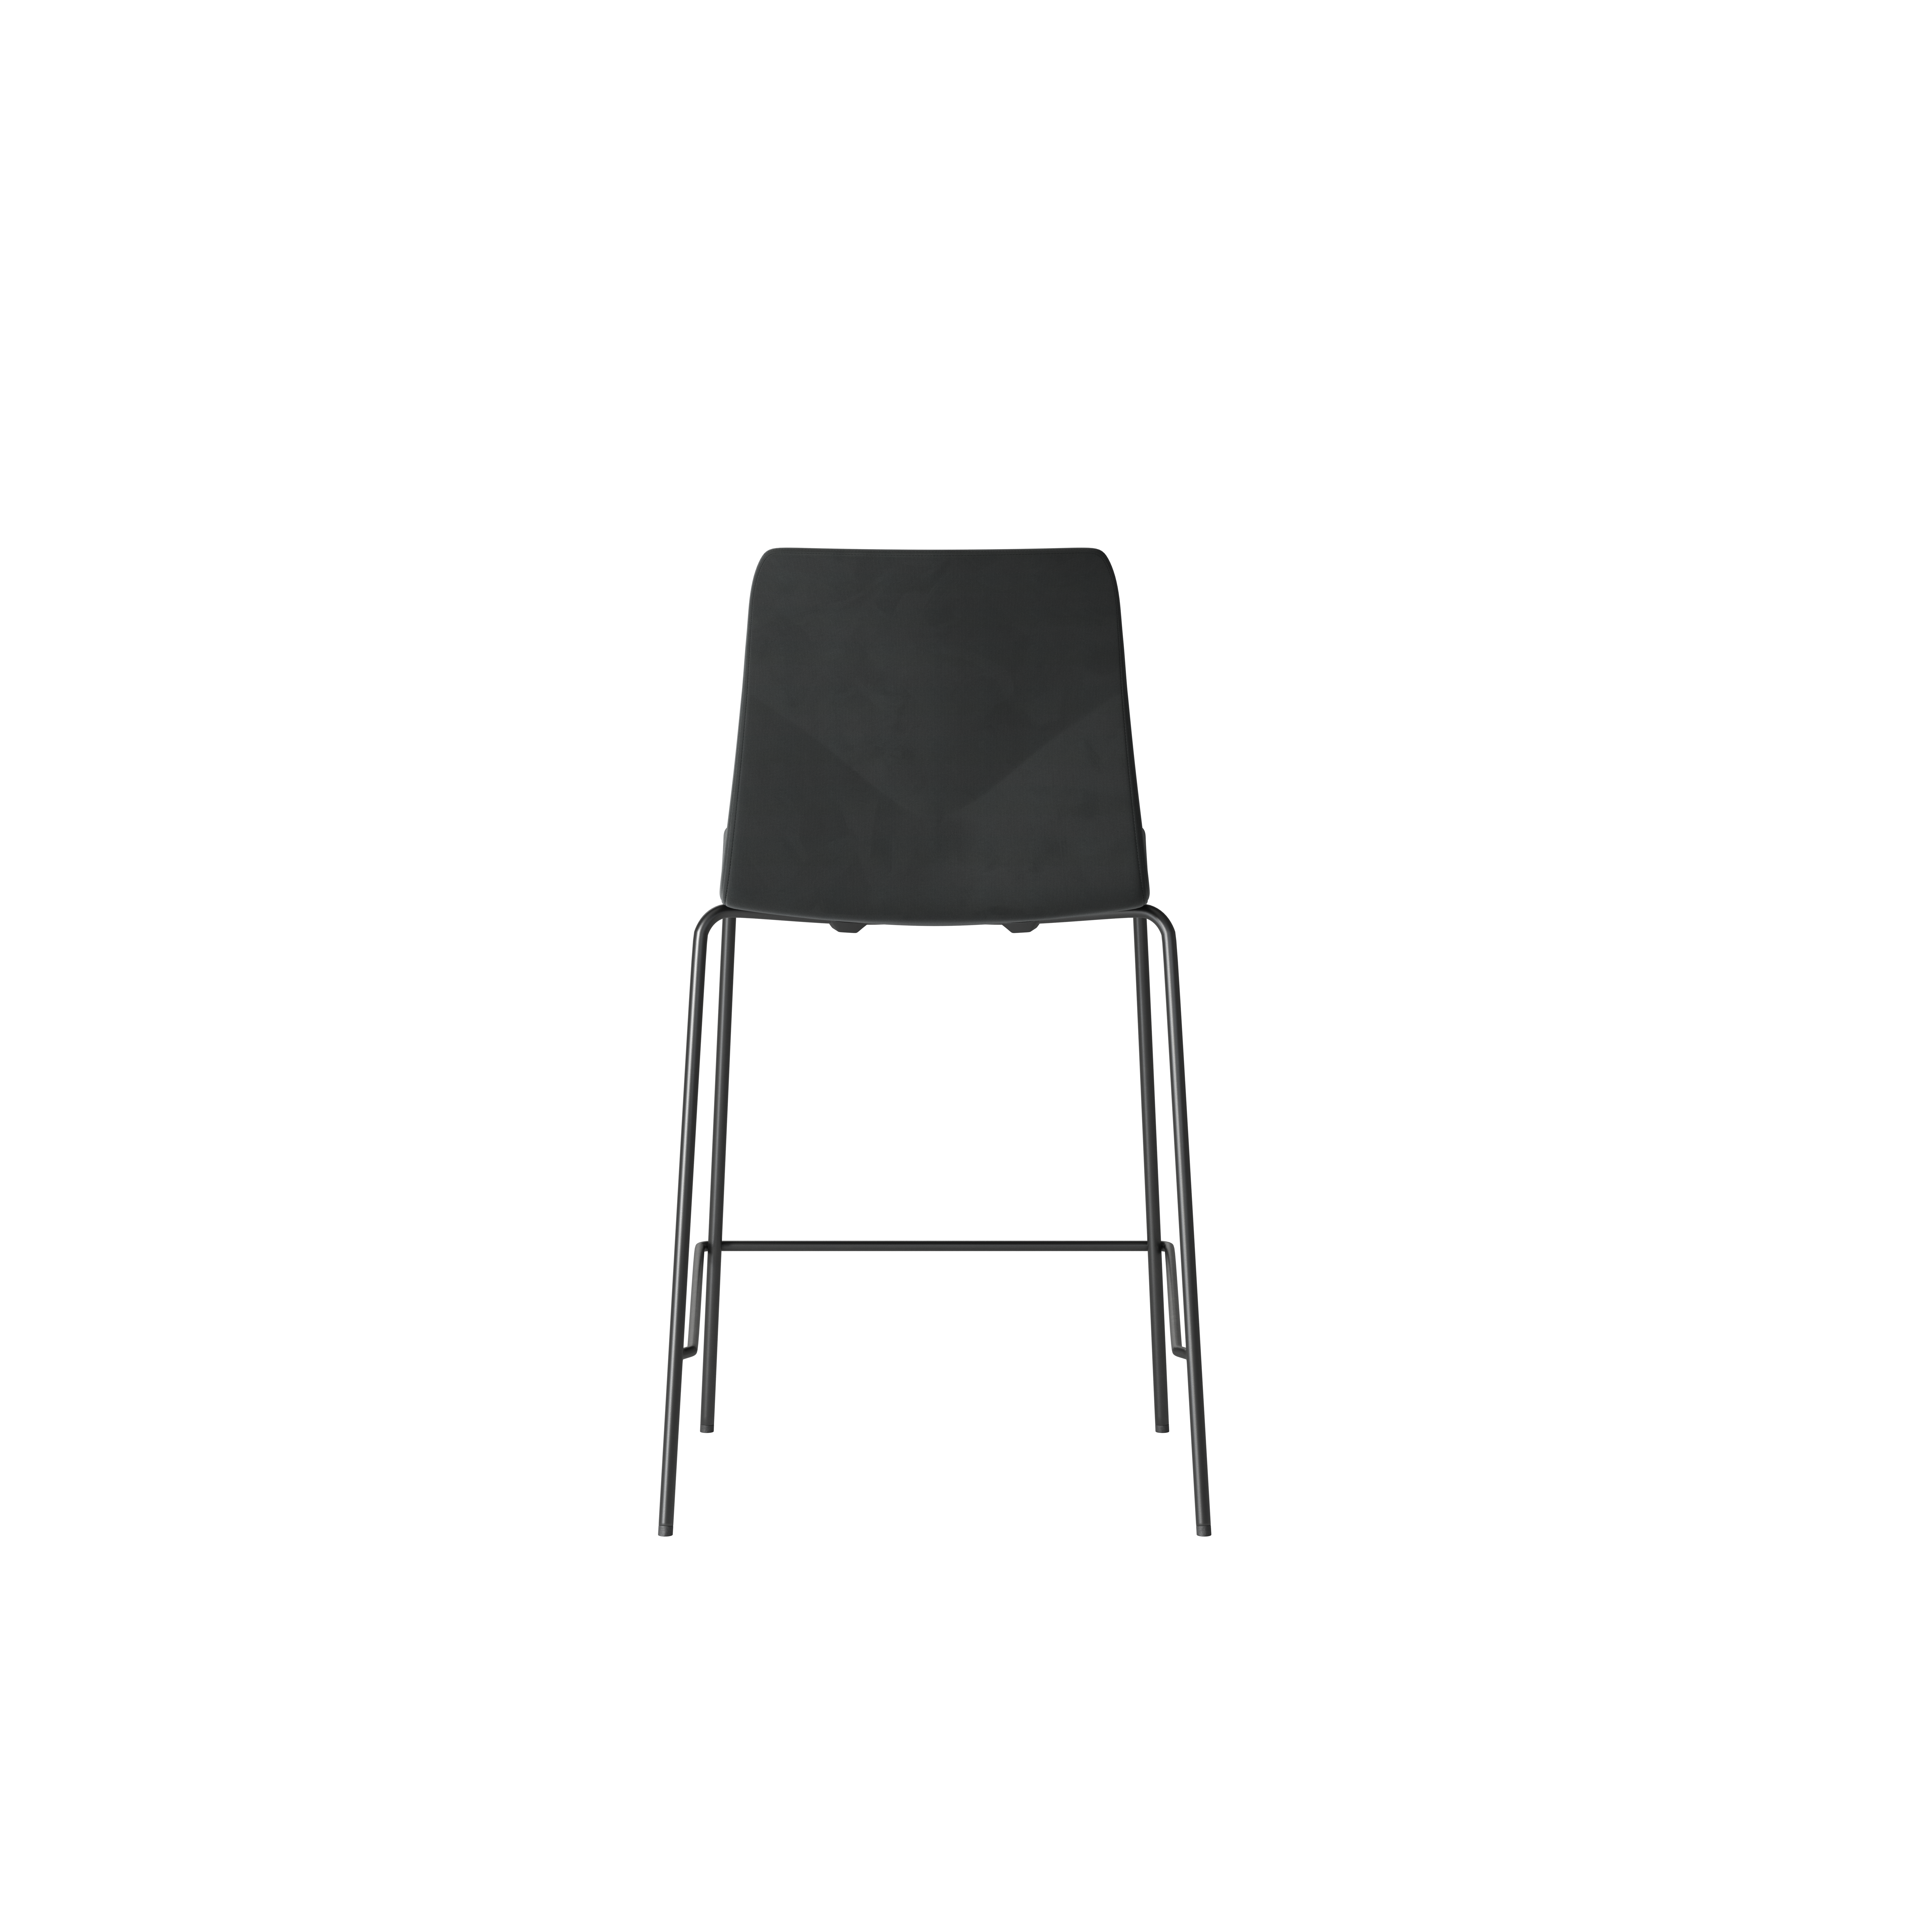 OCEE_FOUR – Chairs – FourCast 2 Counter Four – Fully Upholstered - Packshot Image 4